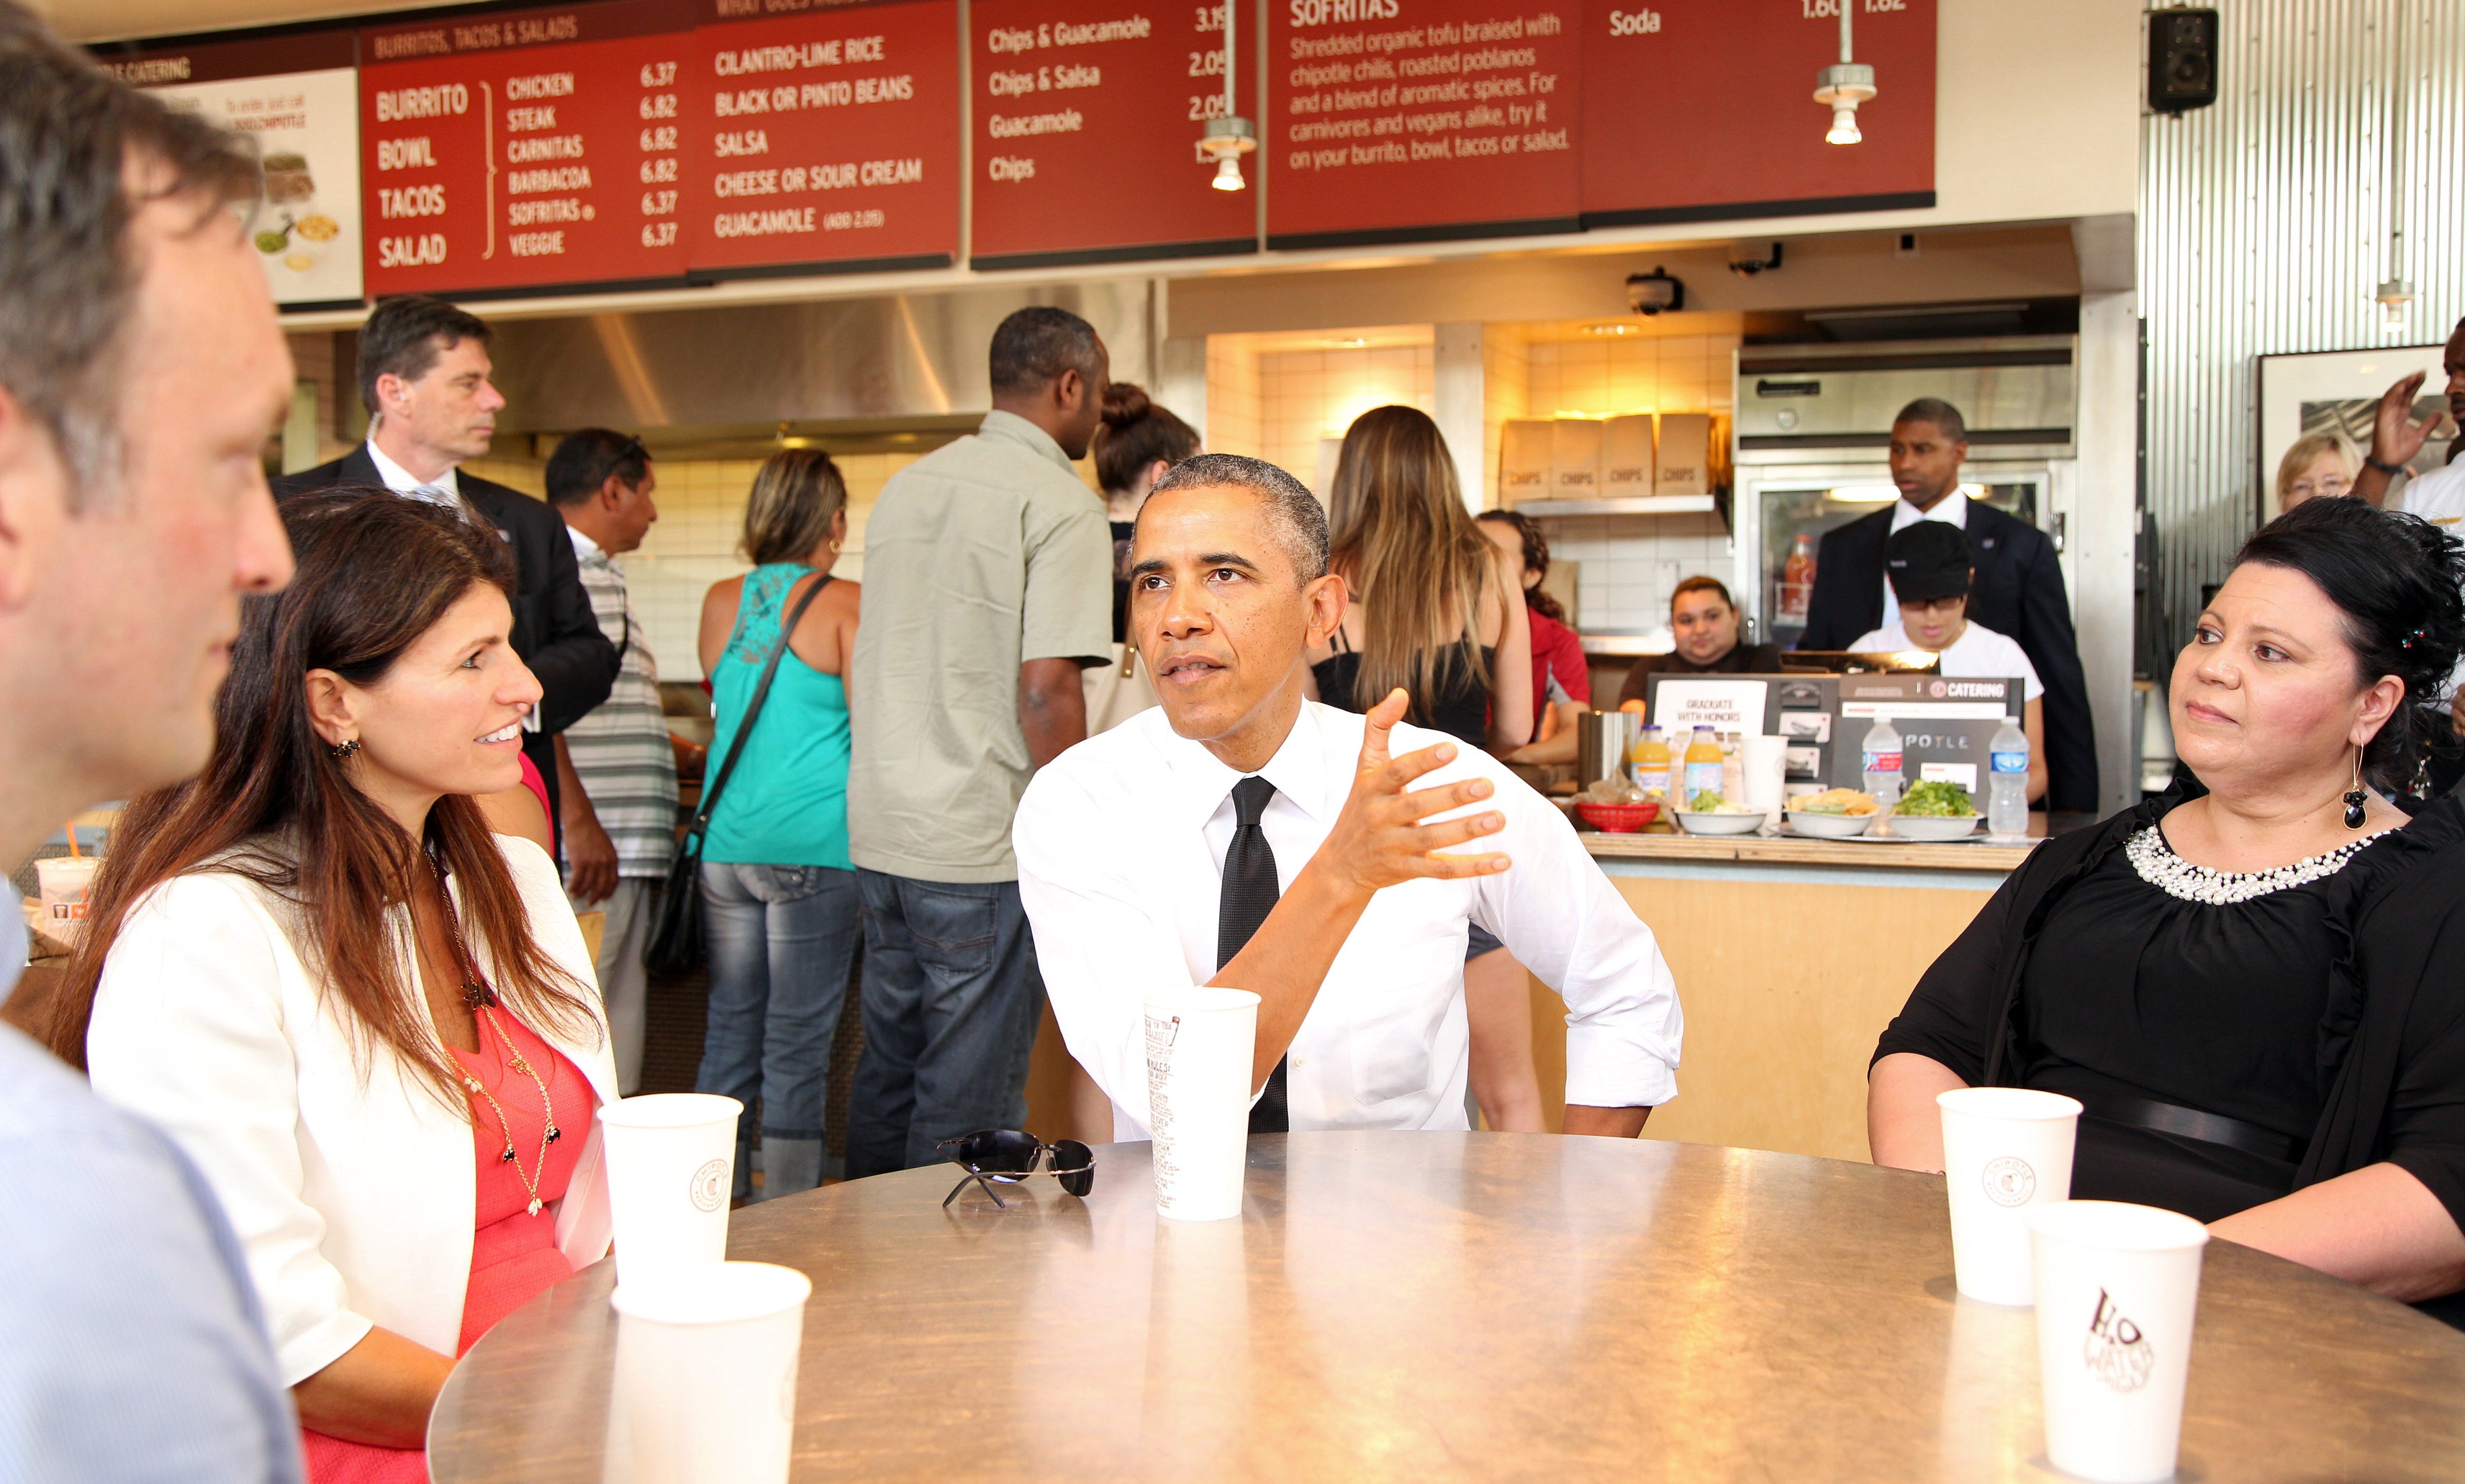 President Barack Obama joins several working parents, (l-r) Roger Trombley, Lisa Rumain, and Shelby Ramirez for lunch at a nearby Chipotle restaurant prior to speakinging at the first White House Summit on Working Families at the Omni Hotel in Washington, June 23, 2014. (Martin H. Simon—Corbis)